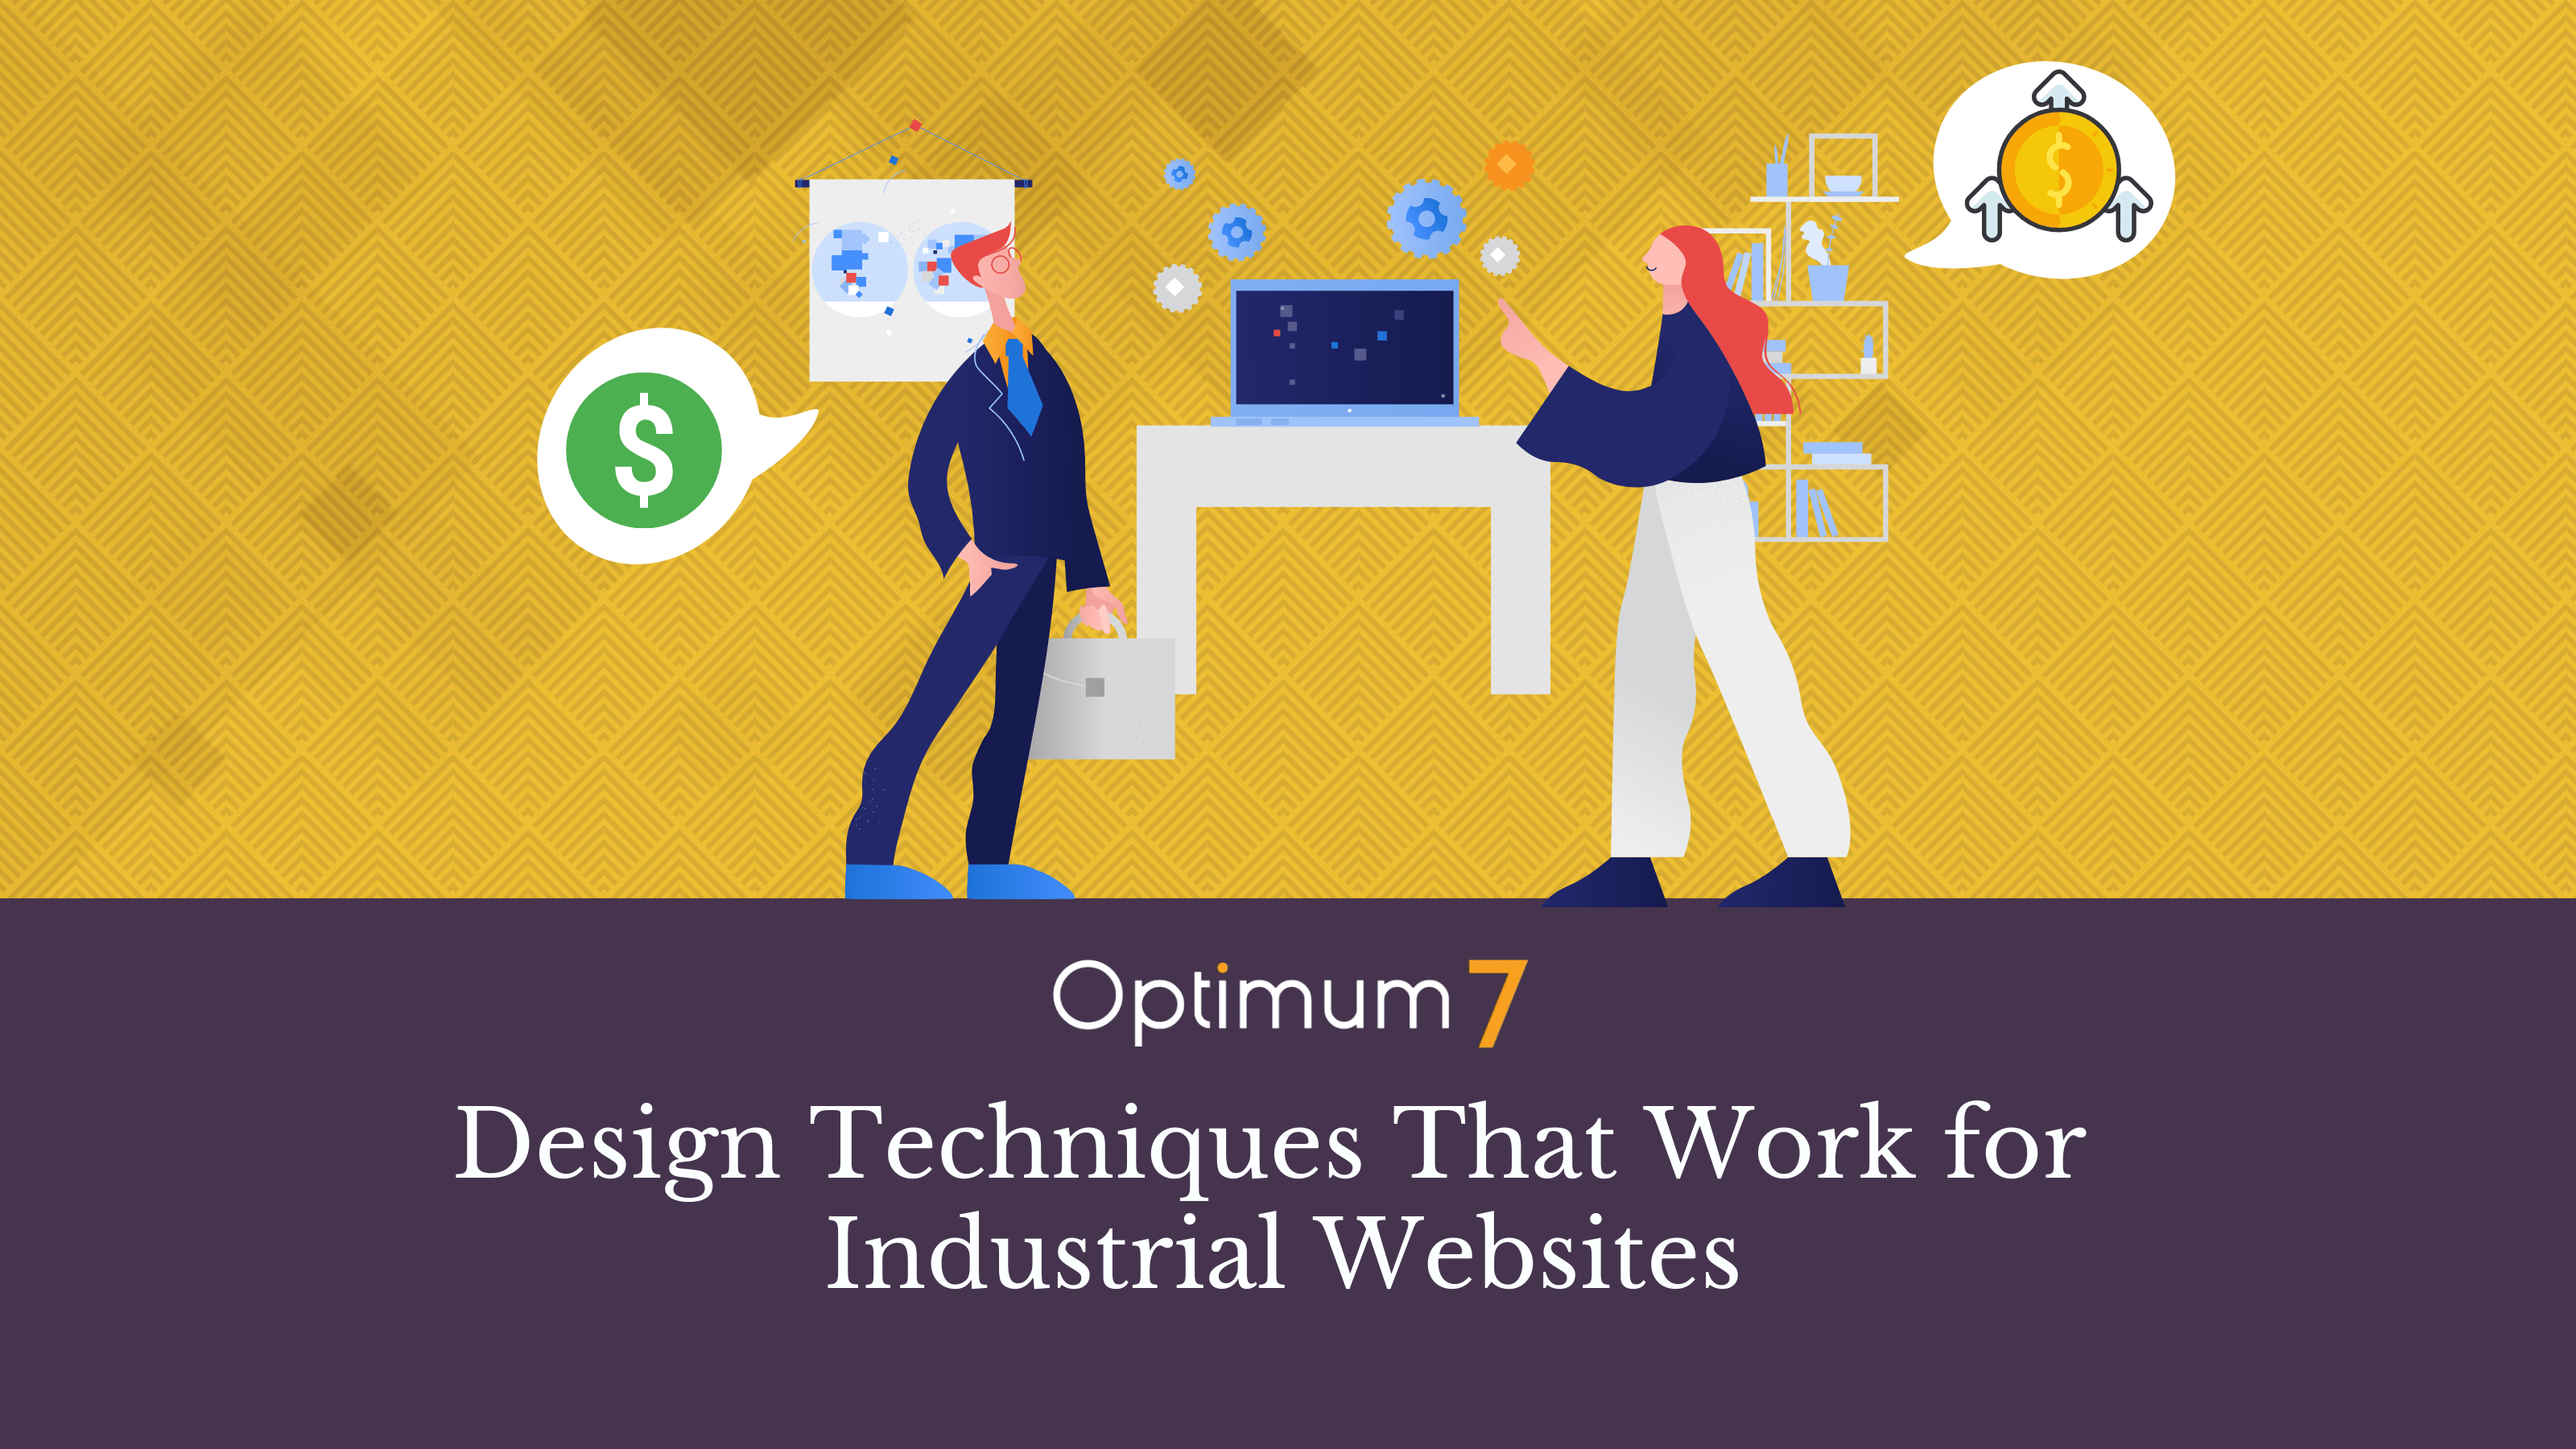 Design Techniques That Work for Industrial Websites